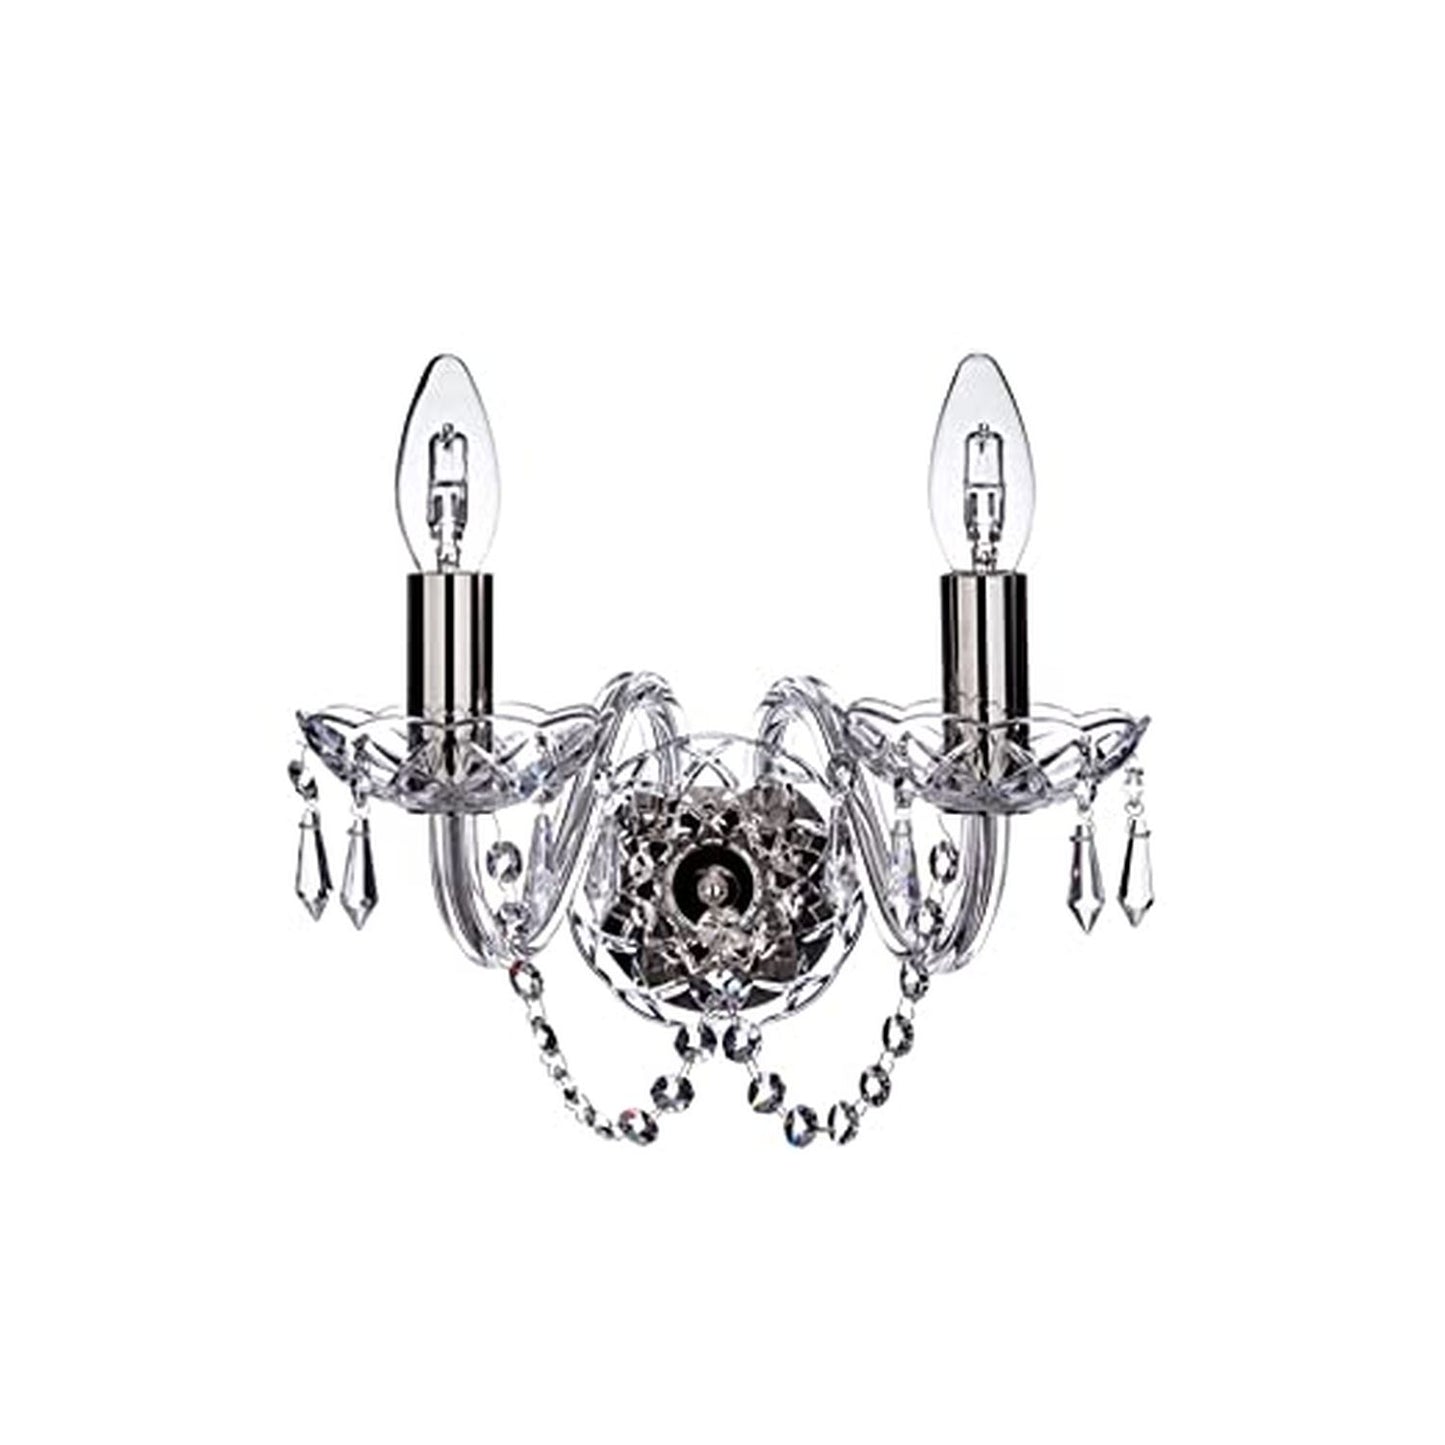 Galway Cashel Wall Sconce, Clear, Crystal, 16" x 16" x 14"